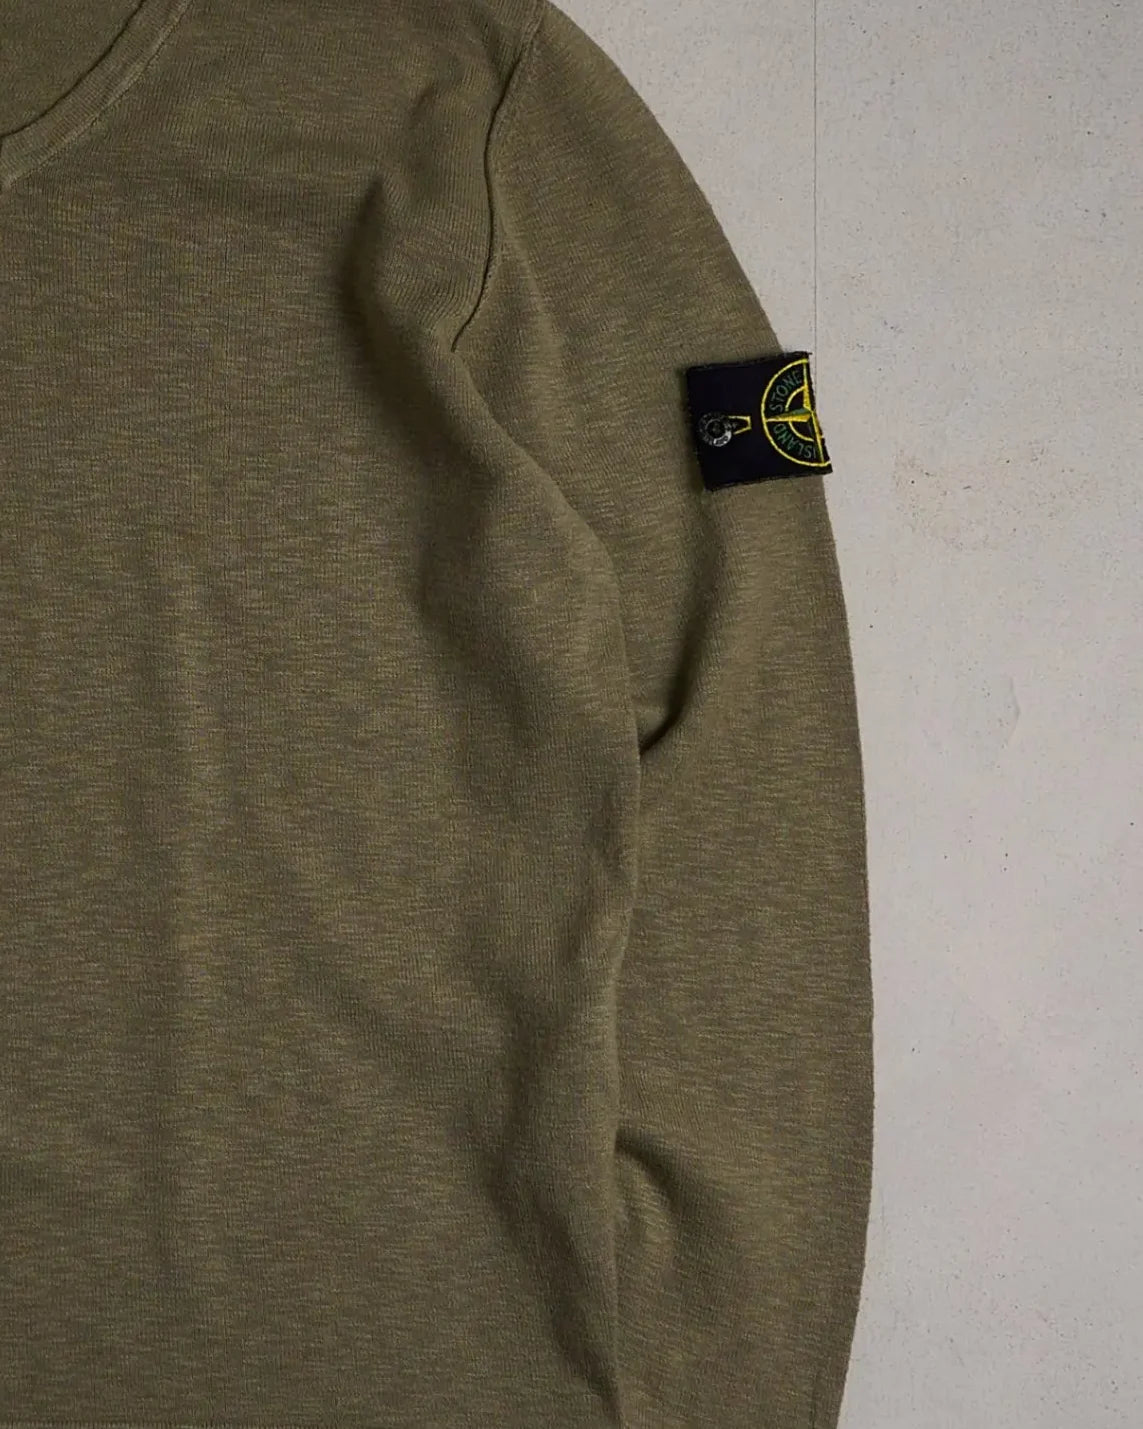 Vintage Stone Island Sweater SS 2018 Right